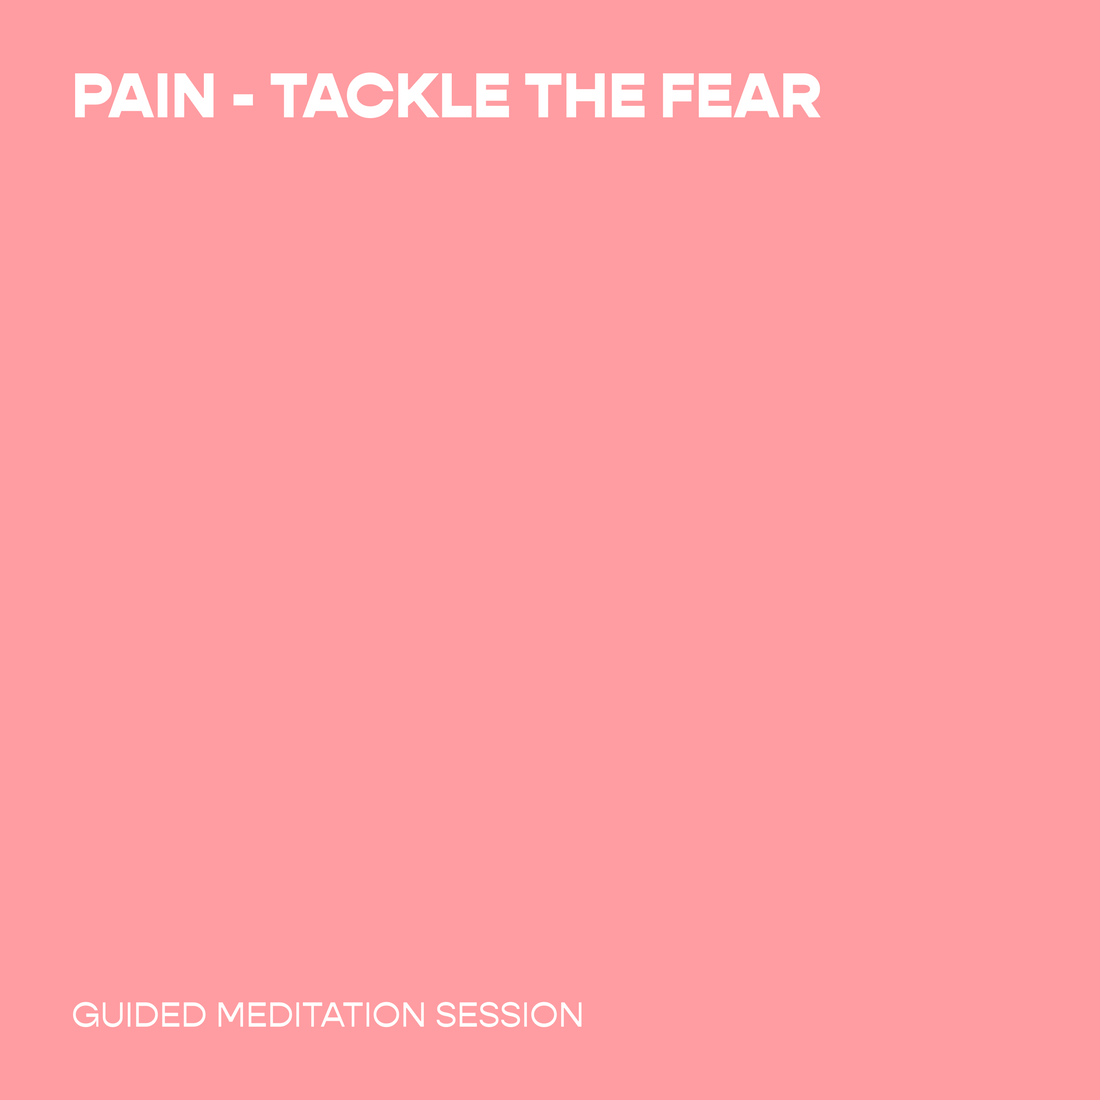 Pain - Tackle the Fear